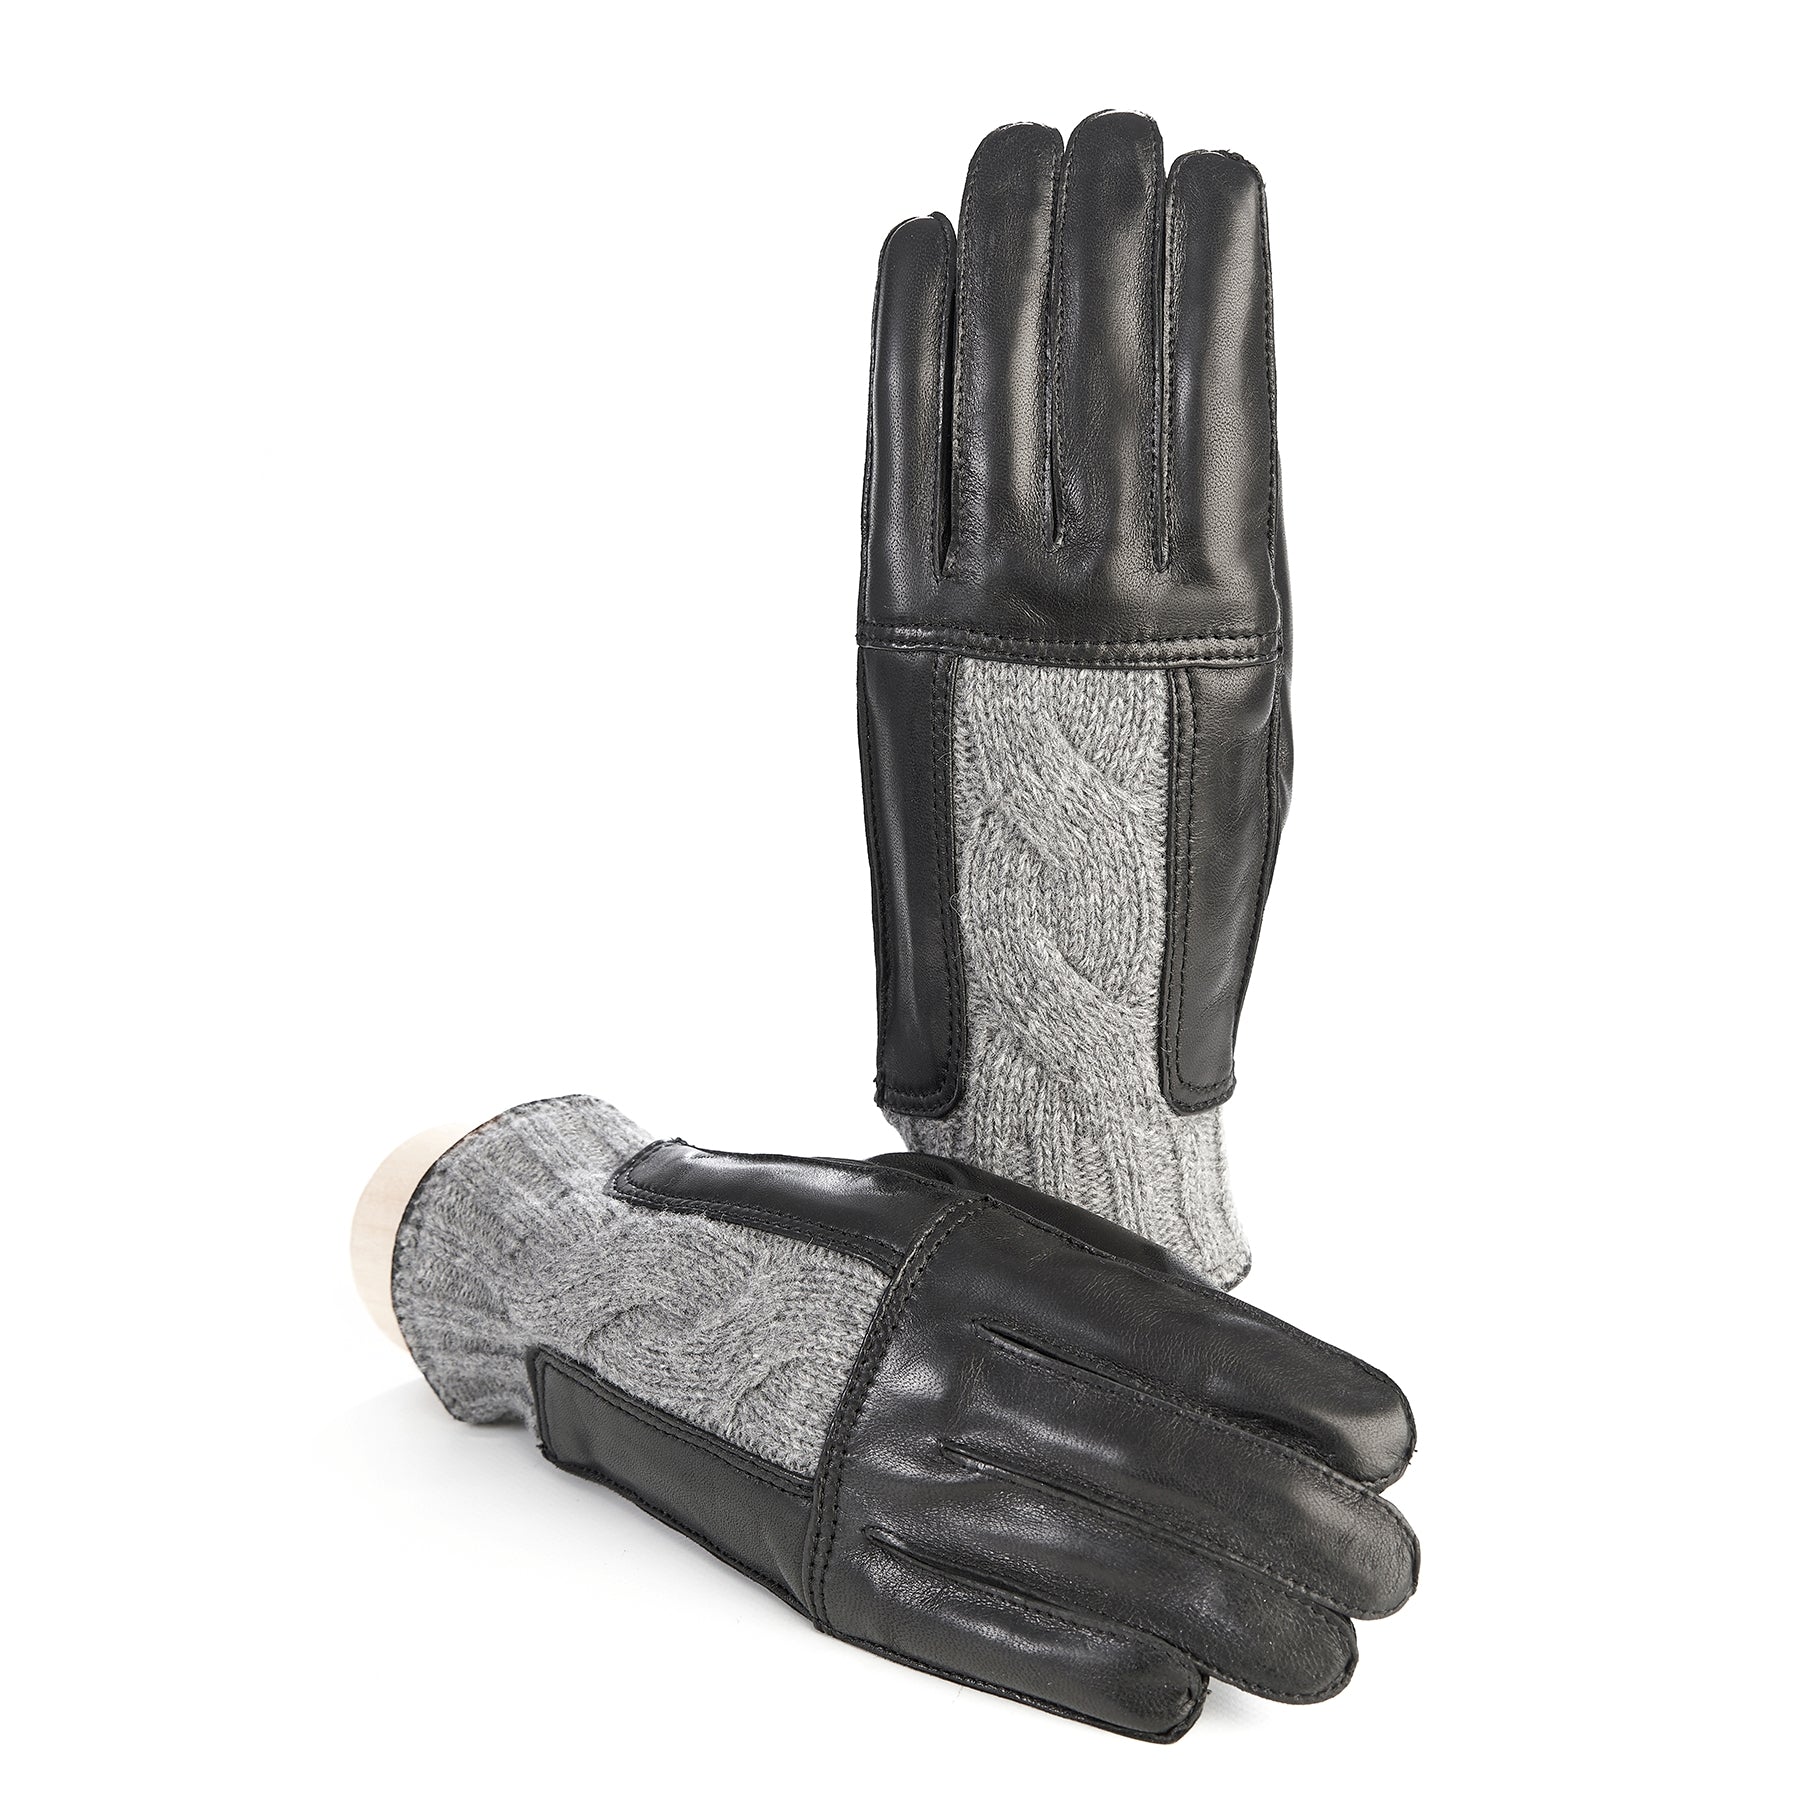 Men's leather gloves in color black with grey woven wool insert on top